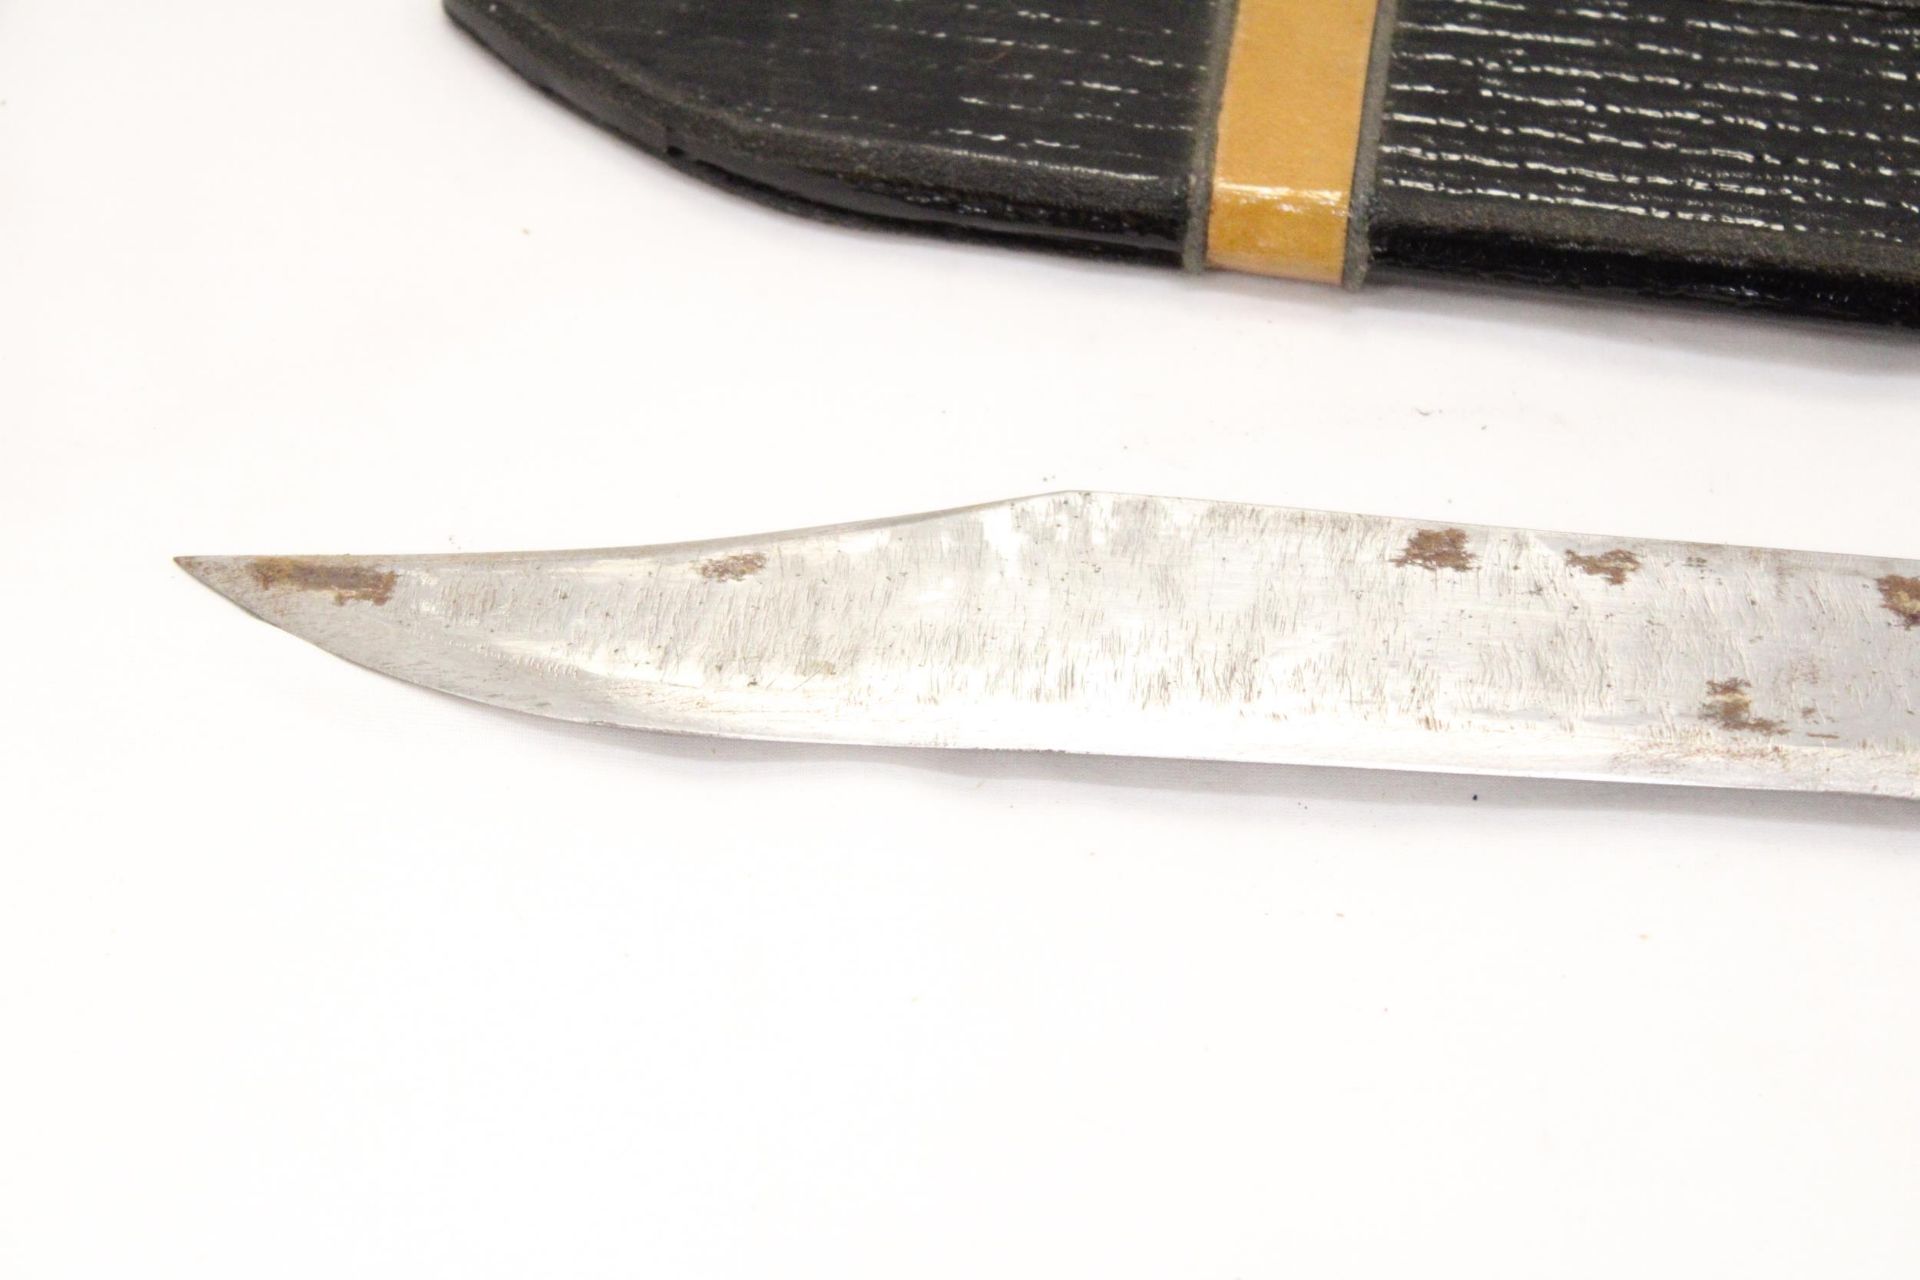 A BOWIE KNIFE IN SHEATH - APPROXIMATELY 40CM LONG - Image 3 of 4